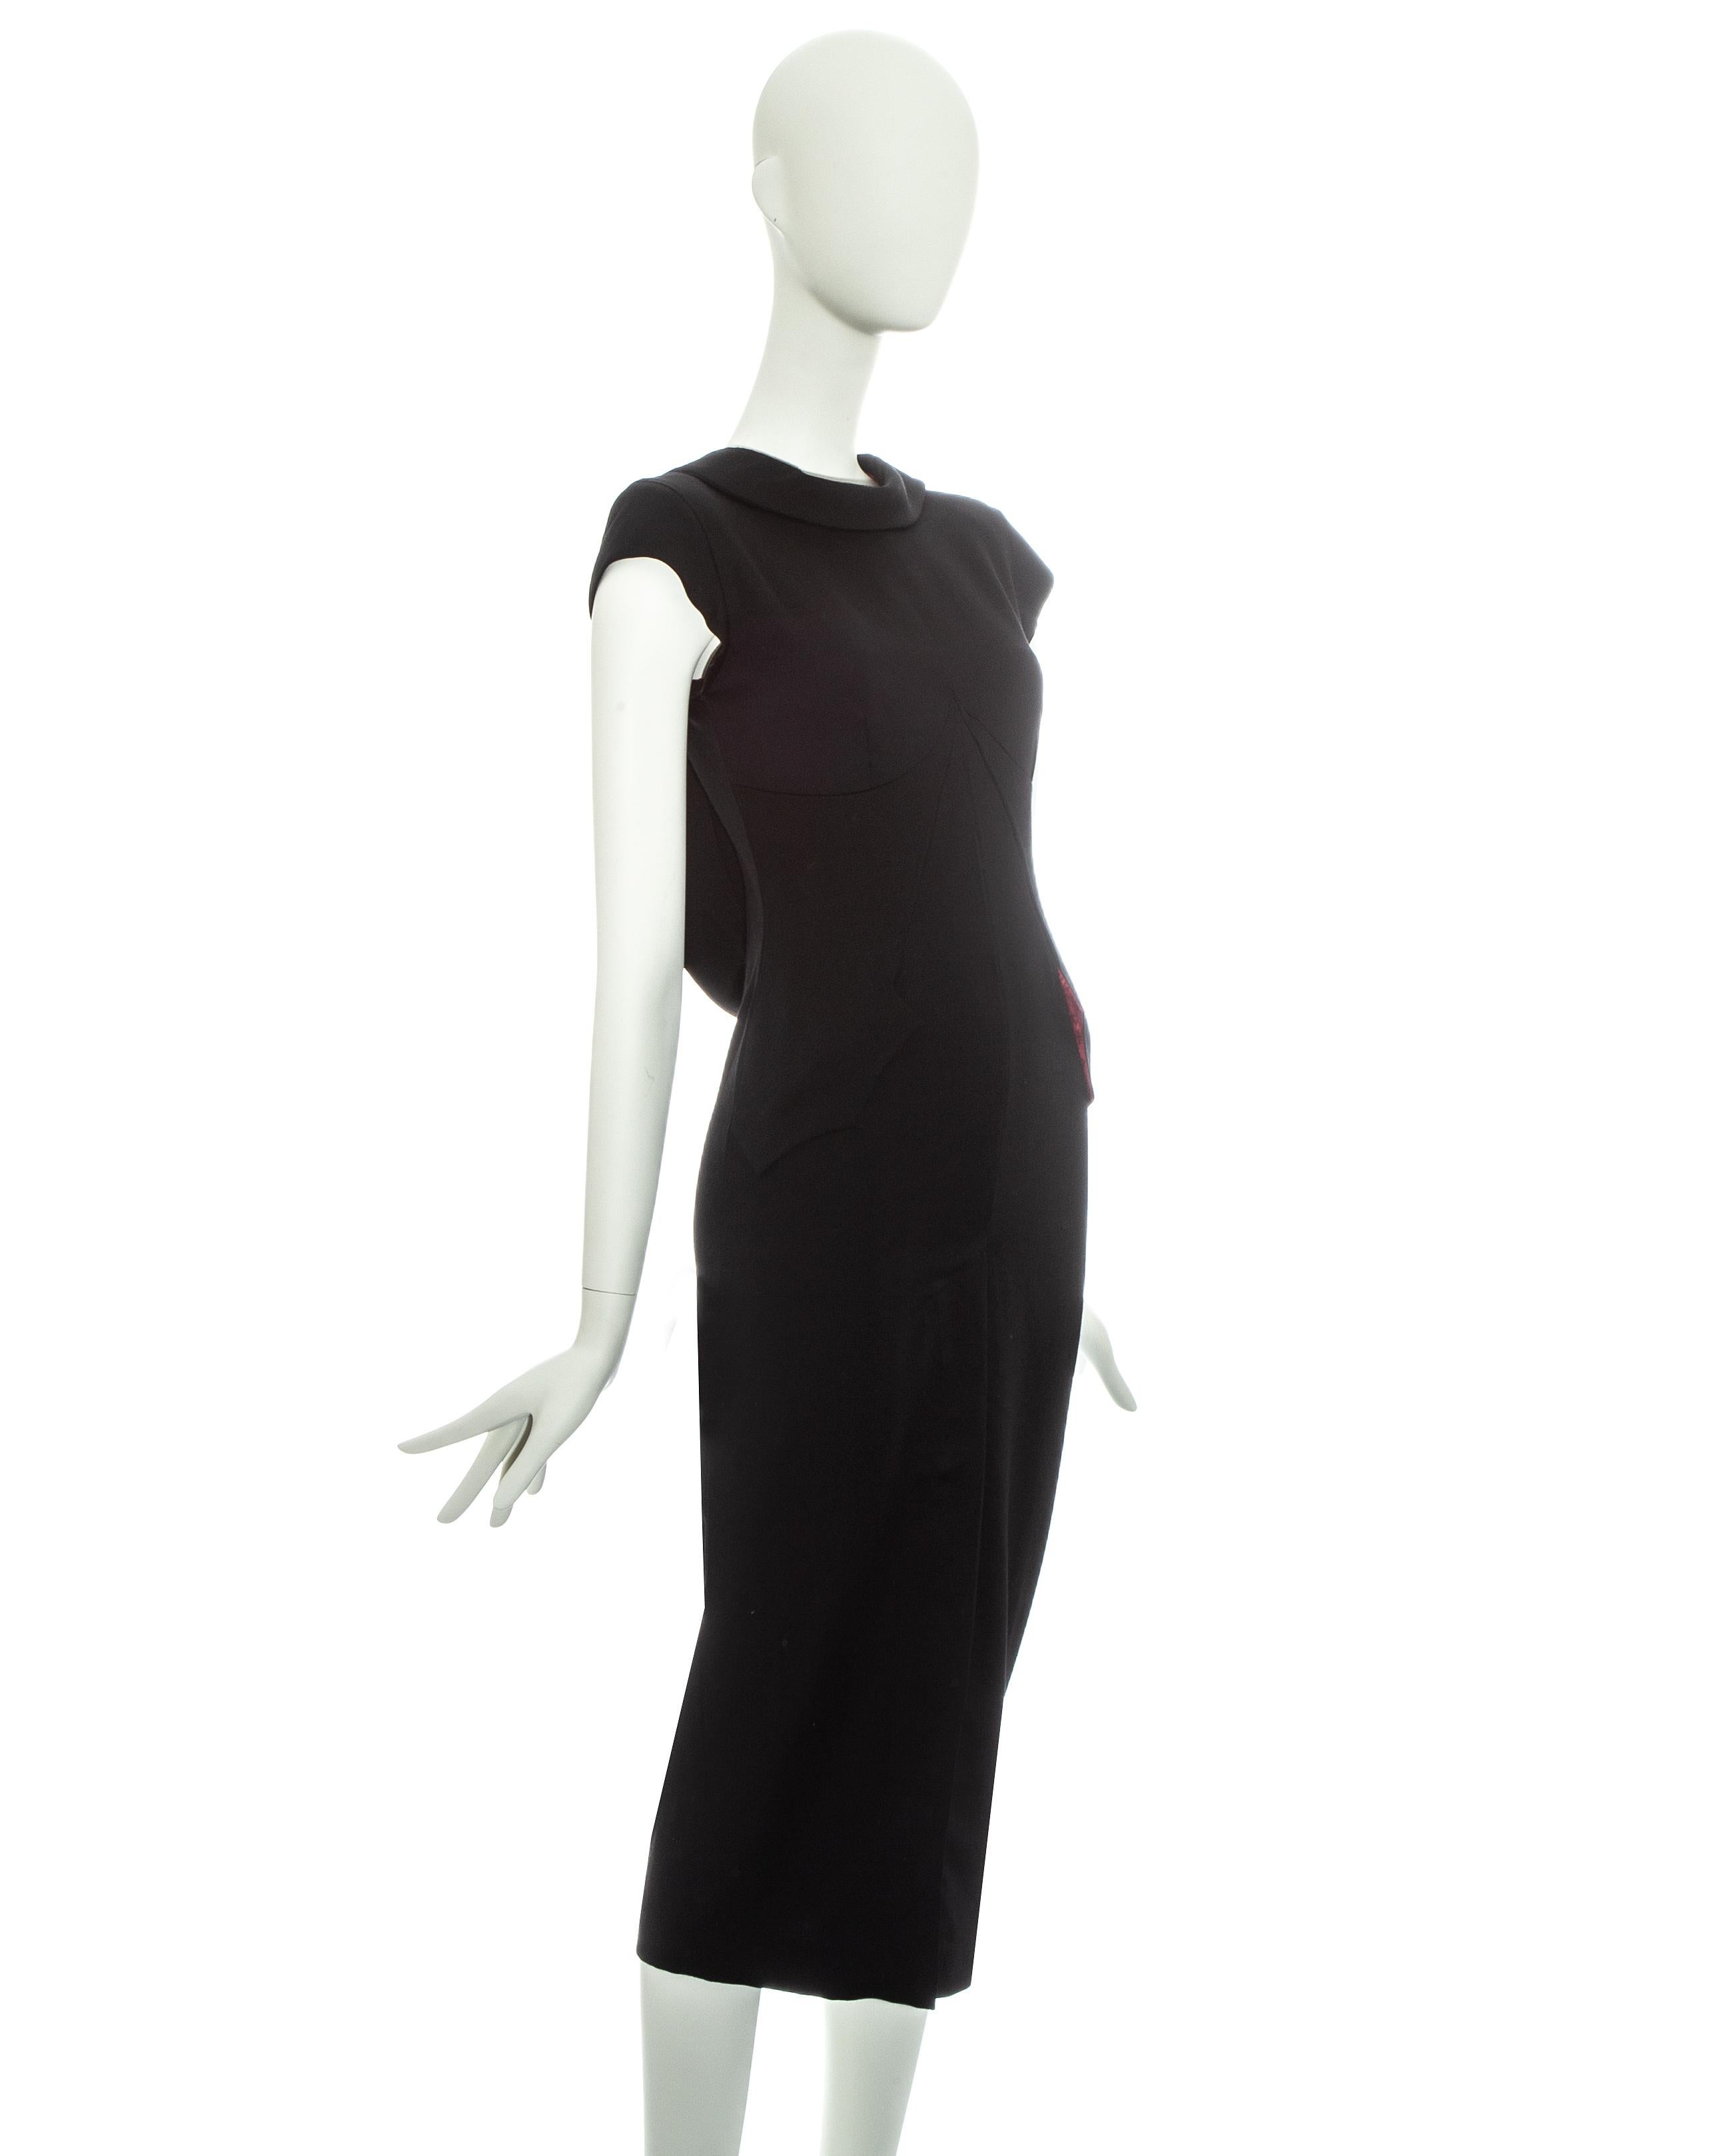 Alexander McQueen black wool fitted mid-length dress with constructed bodice, open back with nude mesh panel, back-to-front shawl lapel, front vent and signature blood red monogram lining. 

Fall-Winter 1998